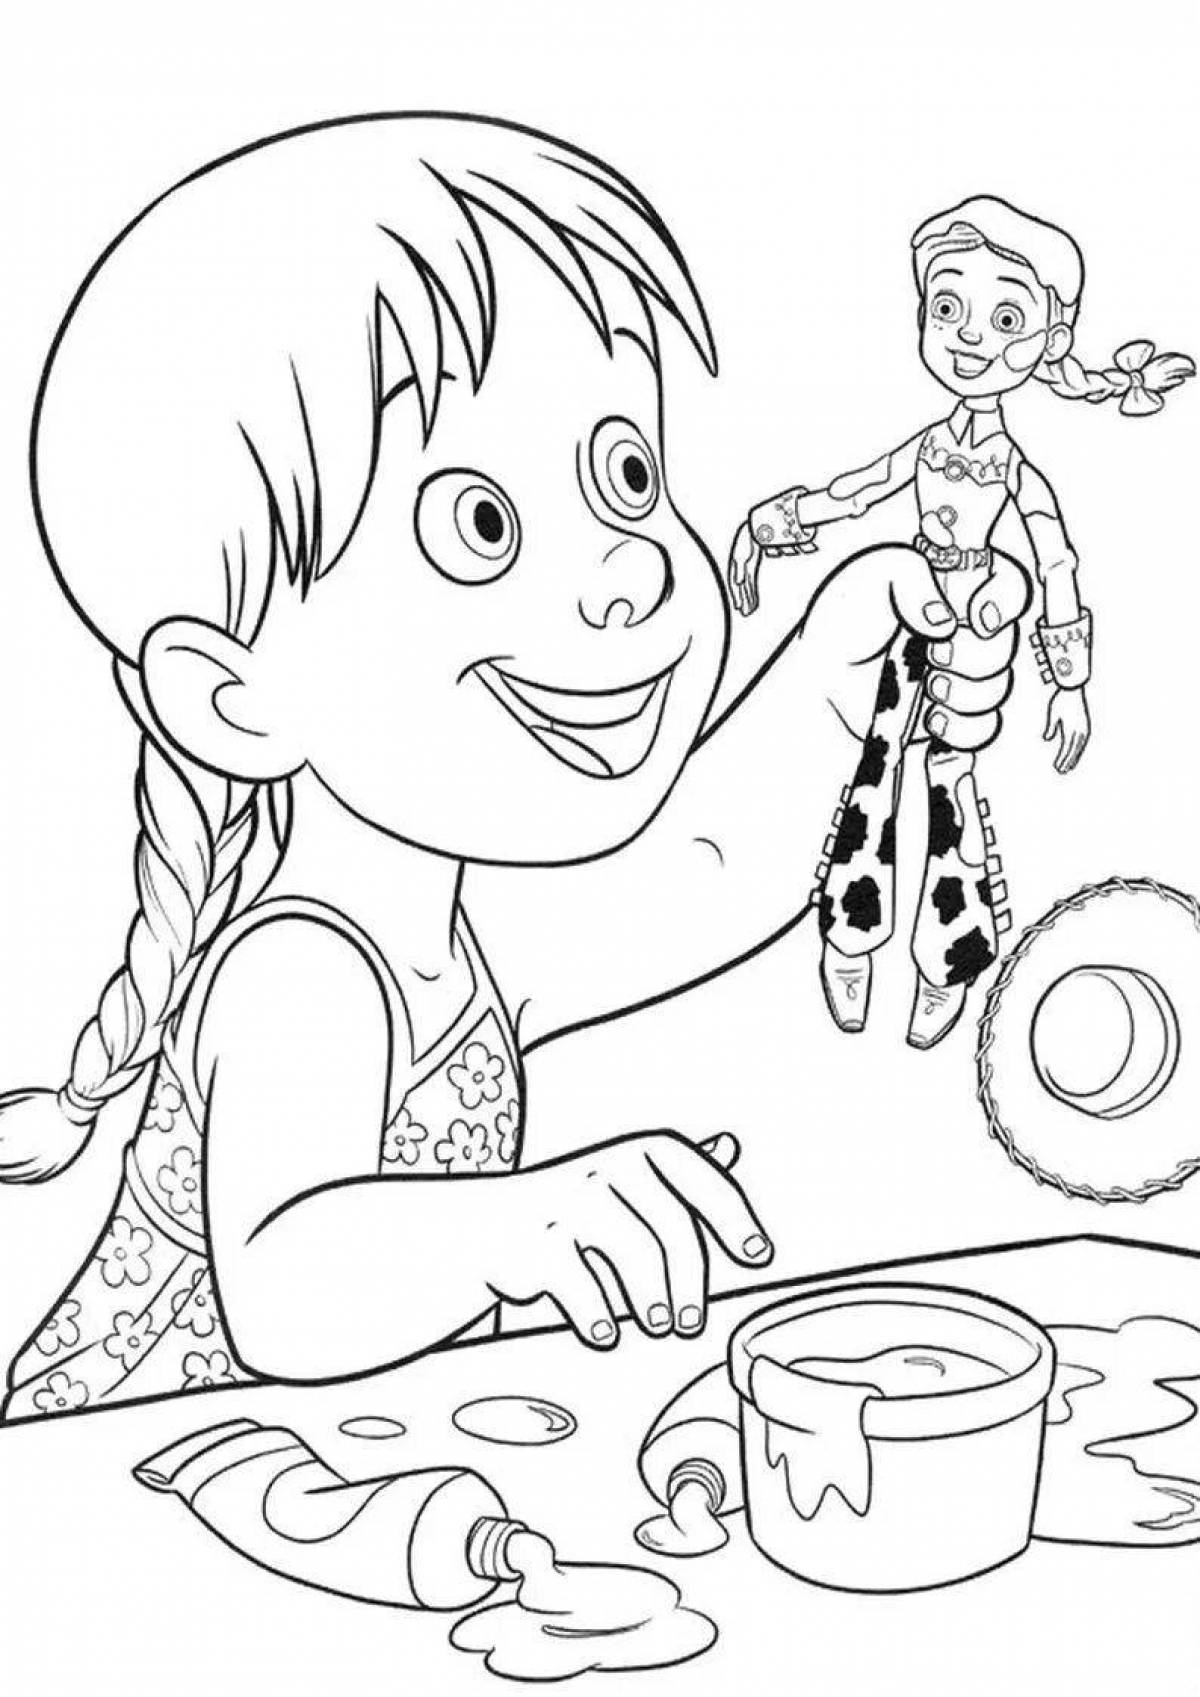 Awesome jessie toy story coloring page